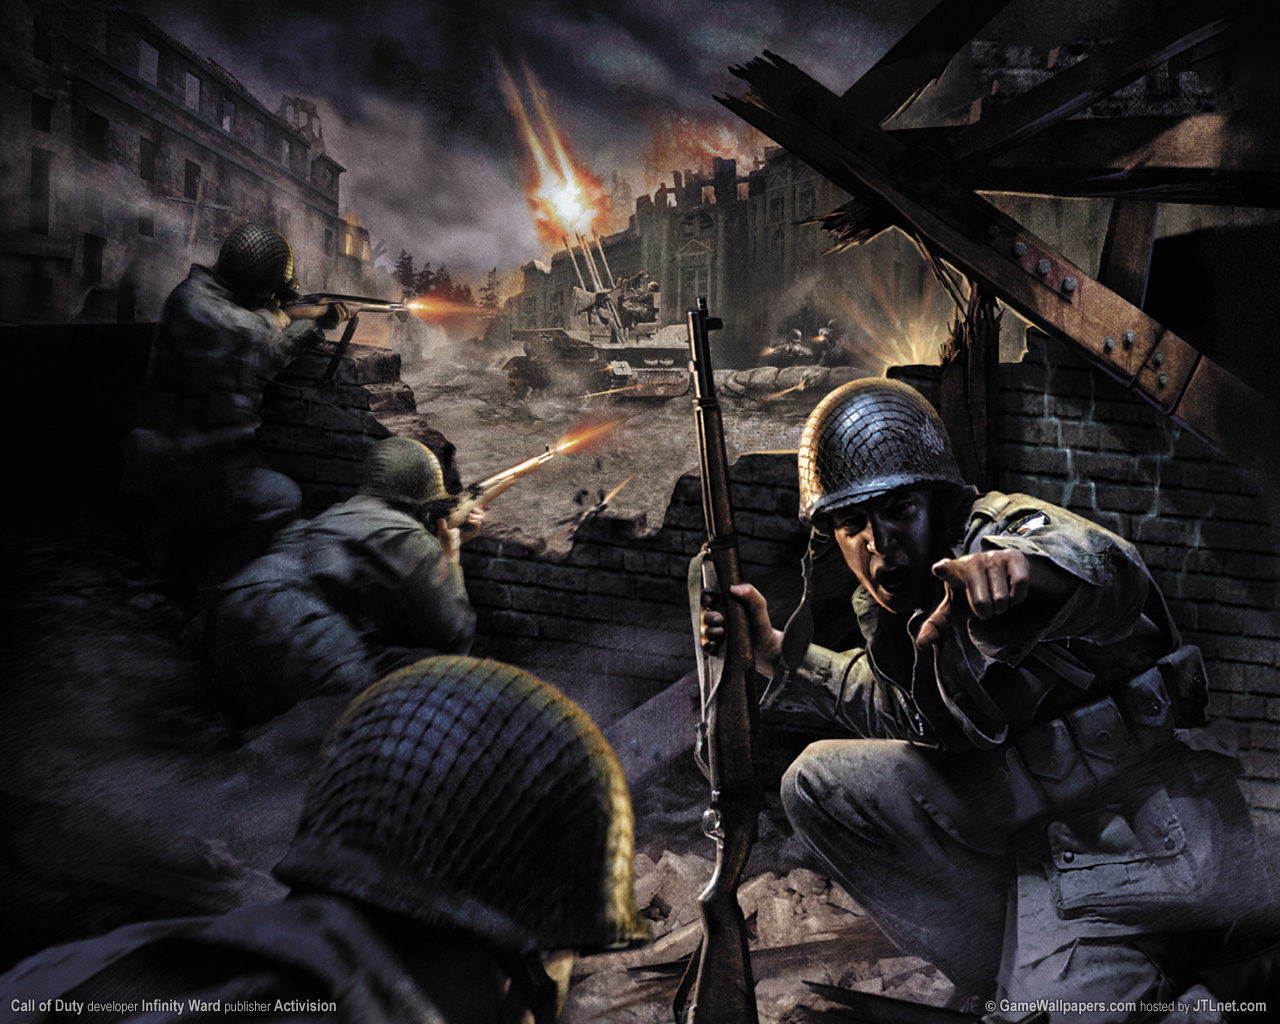 call of duty wallpaper hd,action adventure game,pc game,strategy video game,shooter game,games